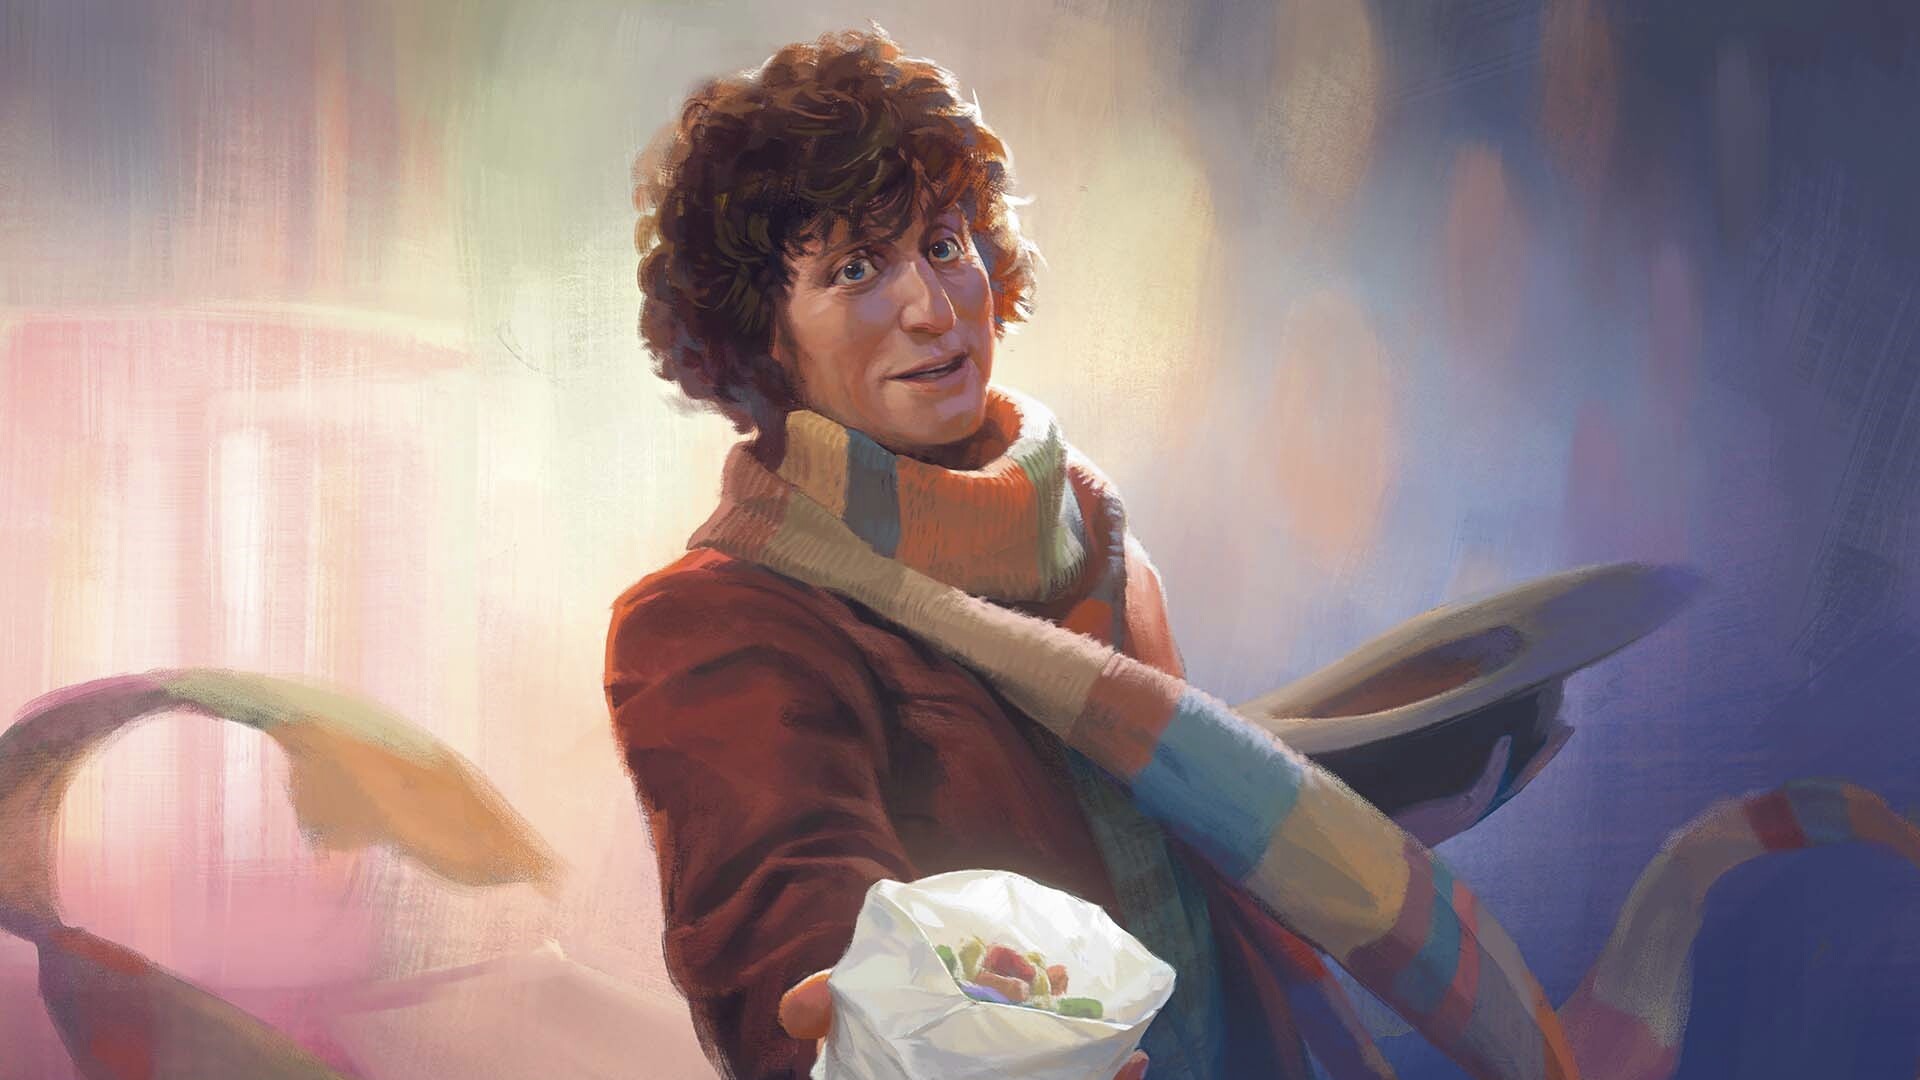 Magic: The Gathering Universes Beyond: The Doctor holding out a bag of jellybeans.